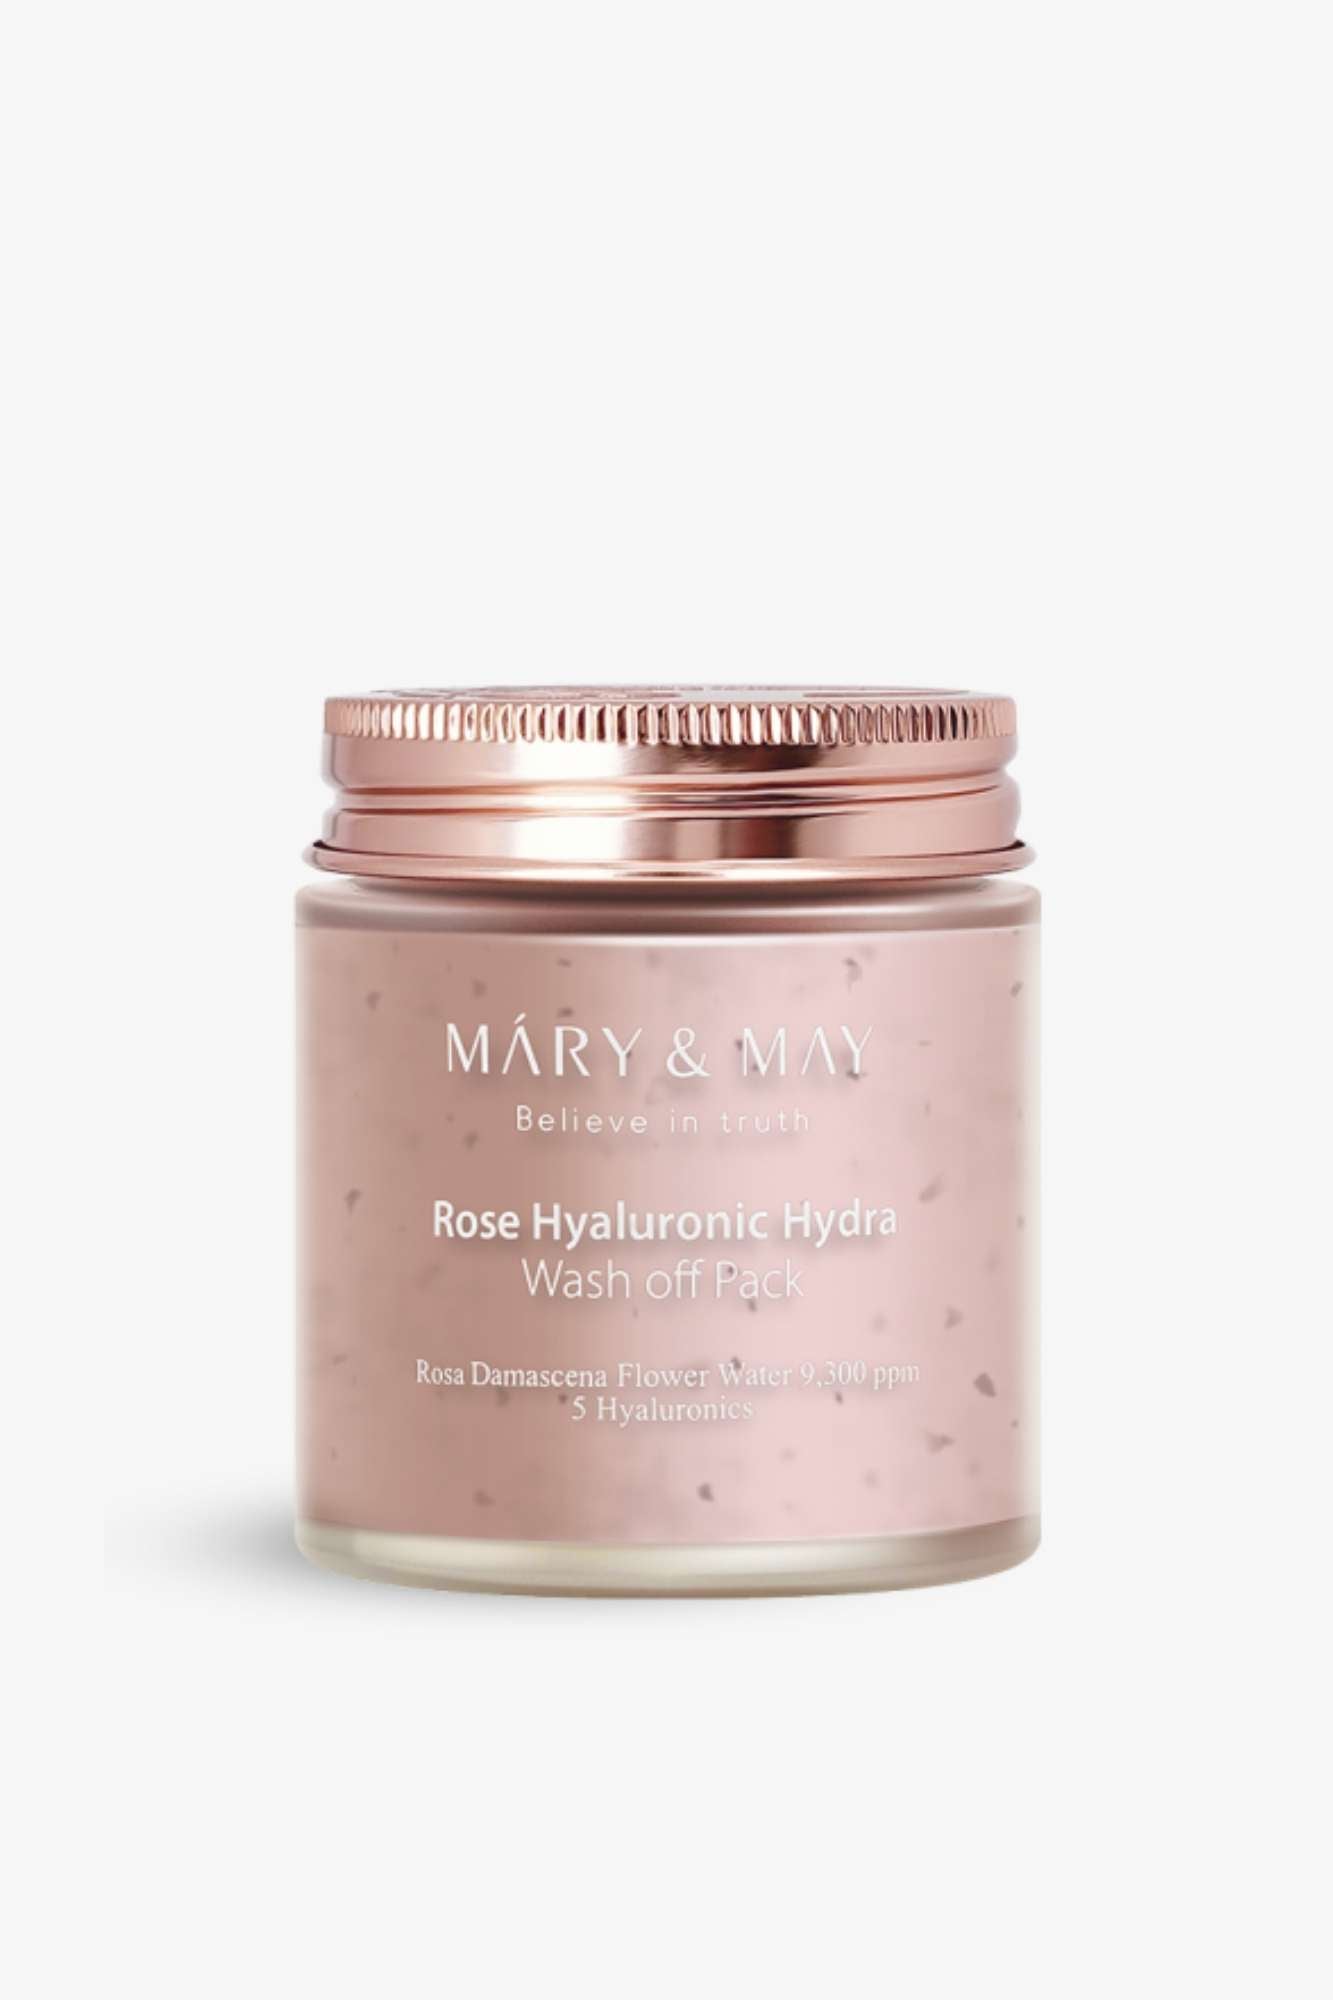 Mary & May - Rose Hyaluronic Hydra Wash Off Pack - 30g / 125g